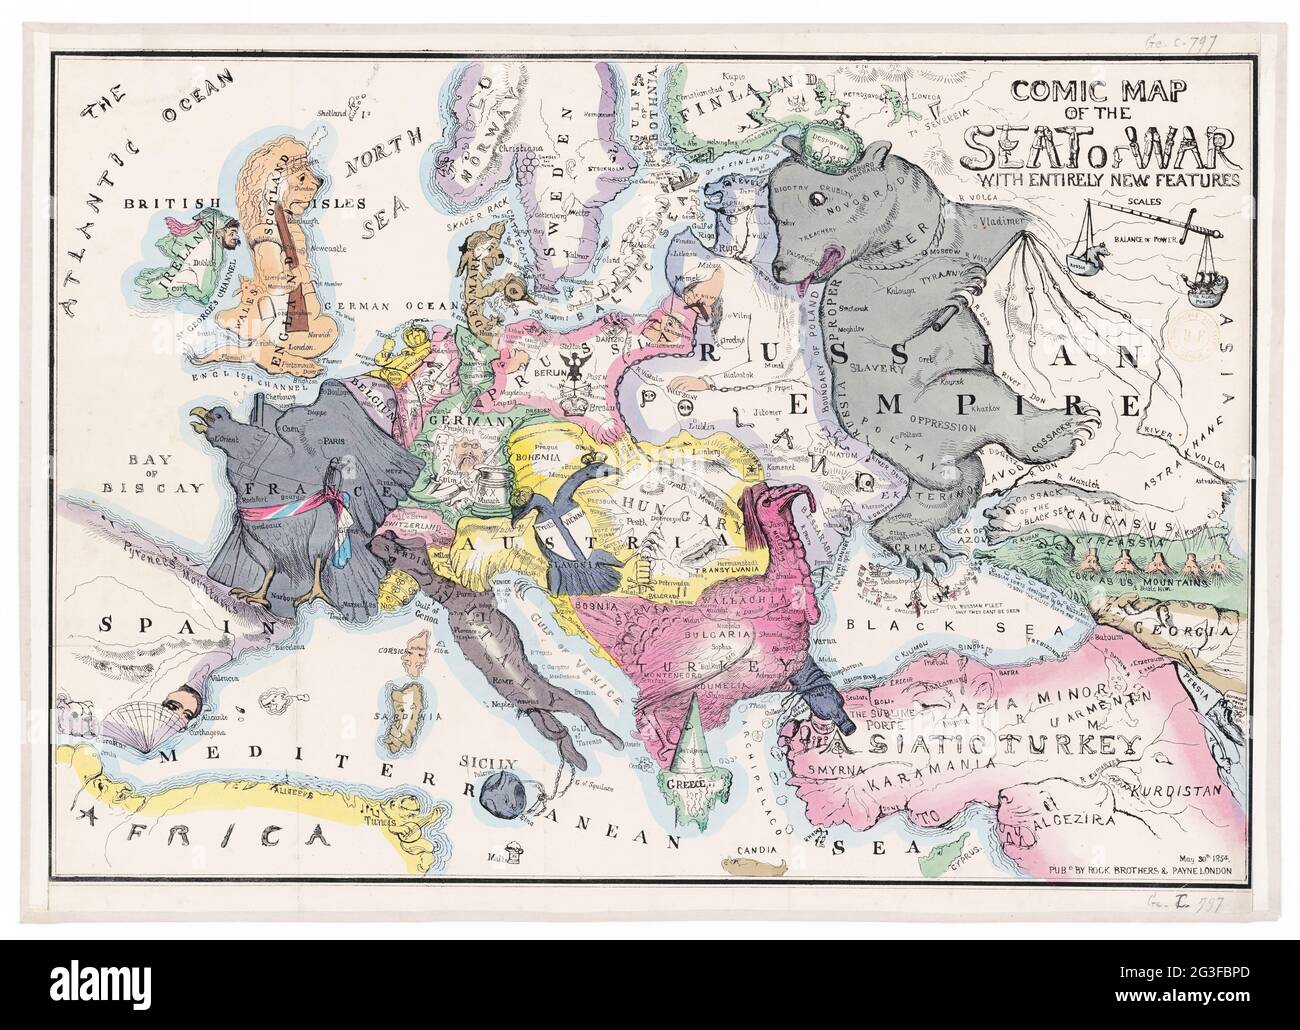 Comic map of the seat of war with entirely new features 1854 – map of Europe Stock Photo